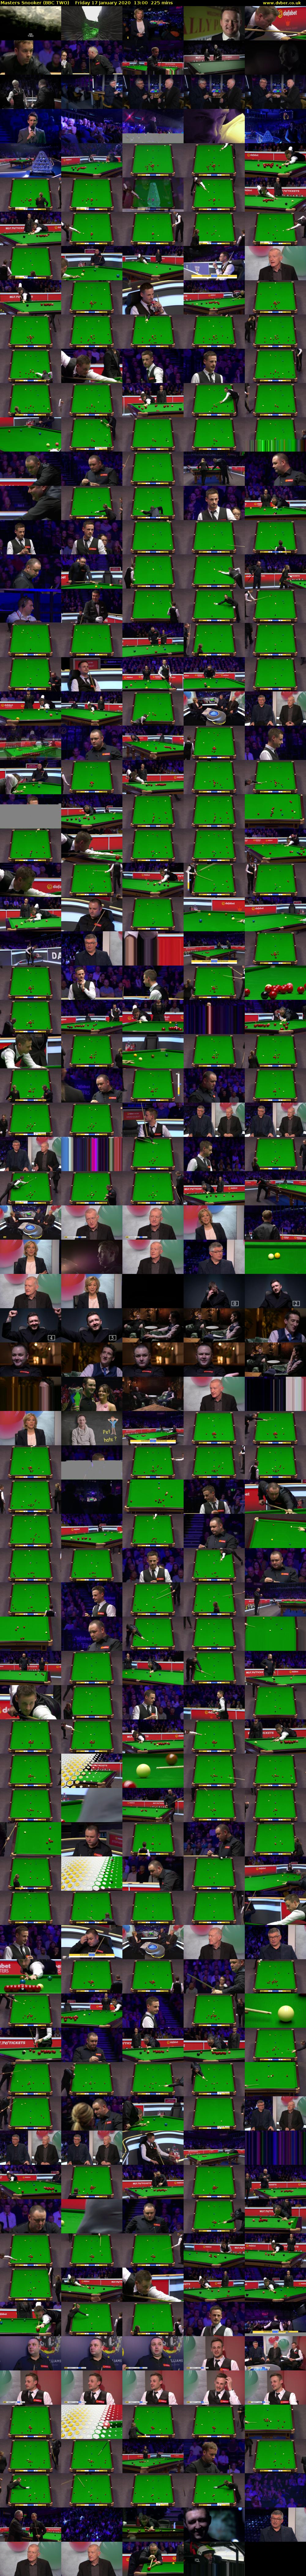 Masters Snooker (BBC TWO) Friday 17 January 2020 13:00 - 16:45